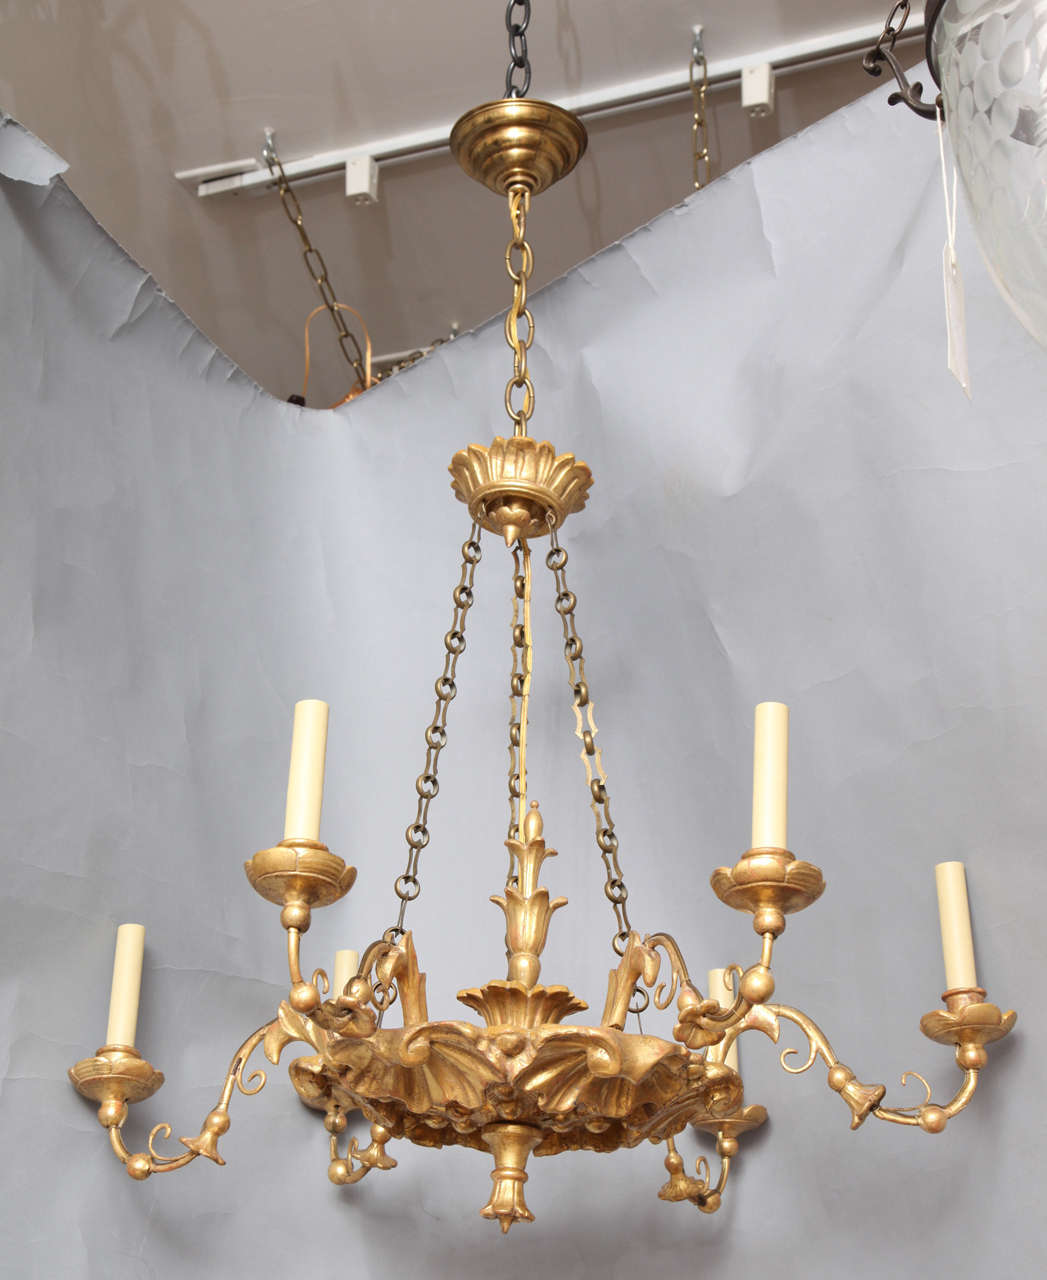 A 6 light Austrian carved and gilt wood chandelier with shell motifs on underside of dish. Suspended from 3 lengths of chain and a gilt wood canopy. The drop could be as little as 24 to 26